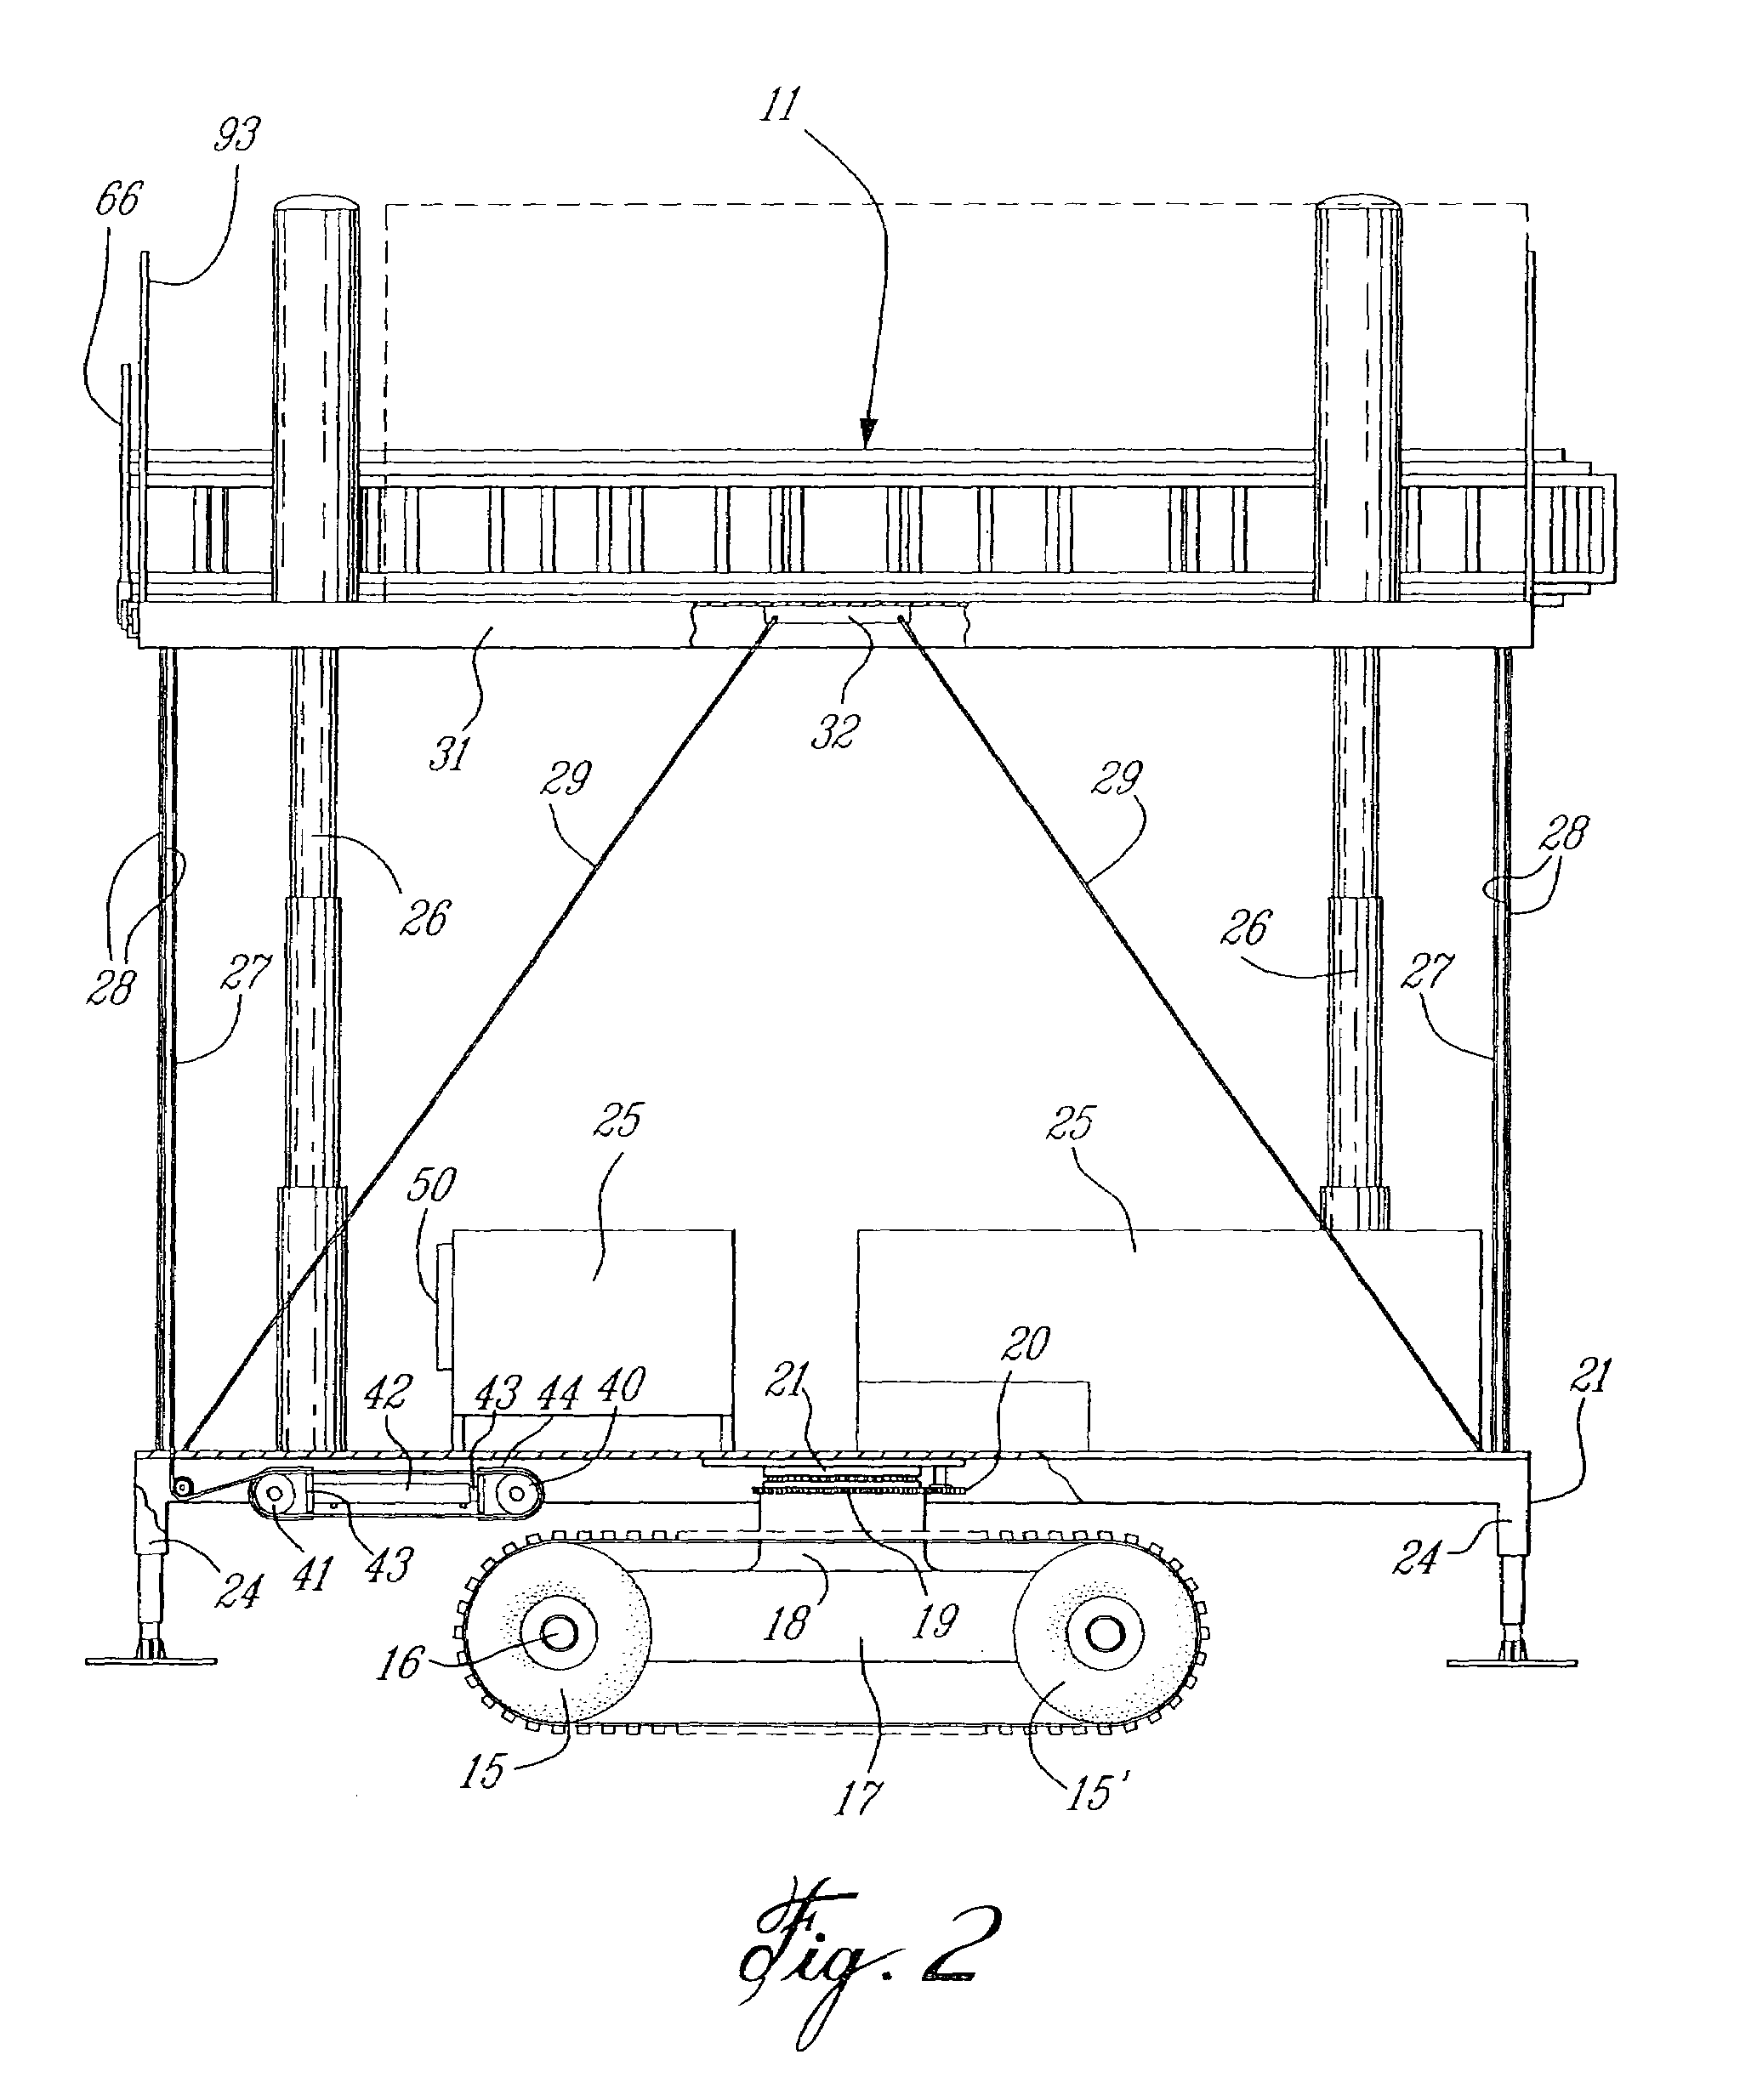 Motorized scaffold with displaceable worker support platform